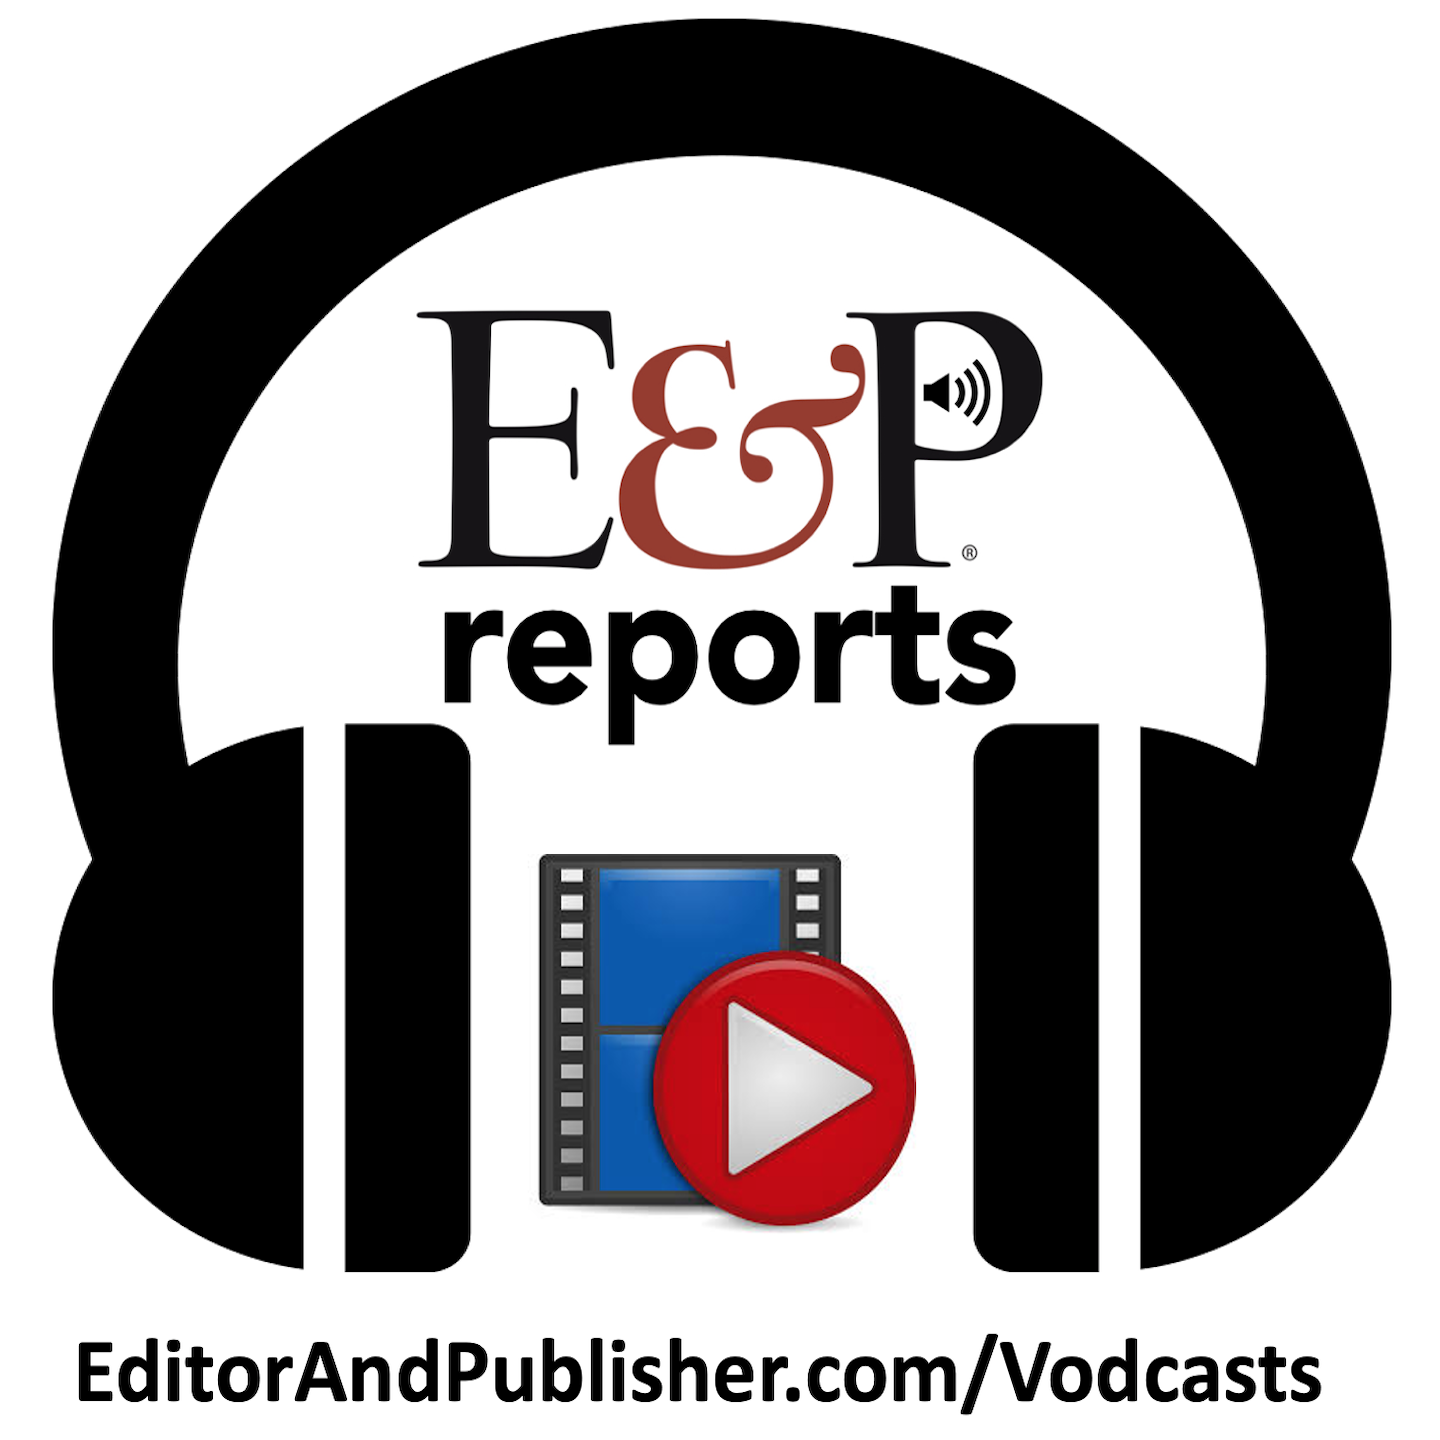 "E & P Reports" from Editor & Publisher Magazine